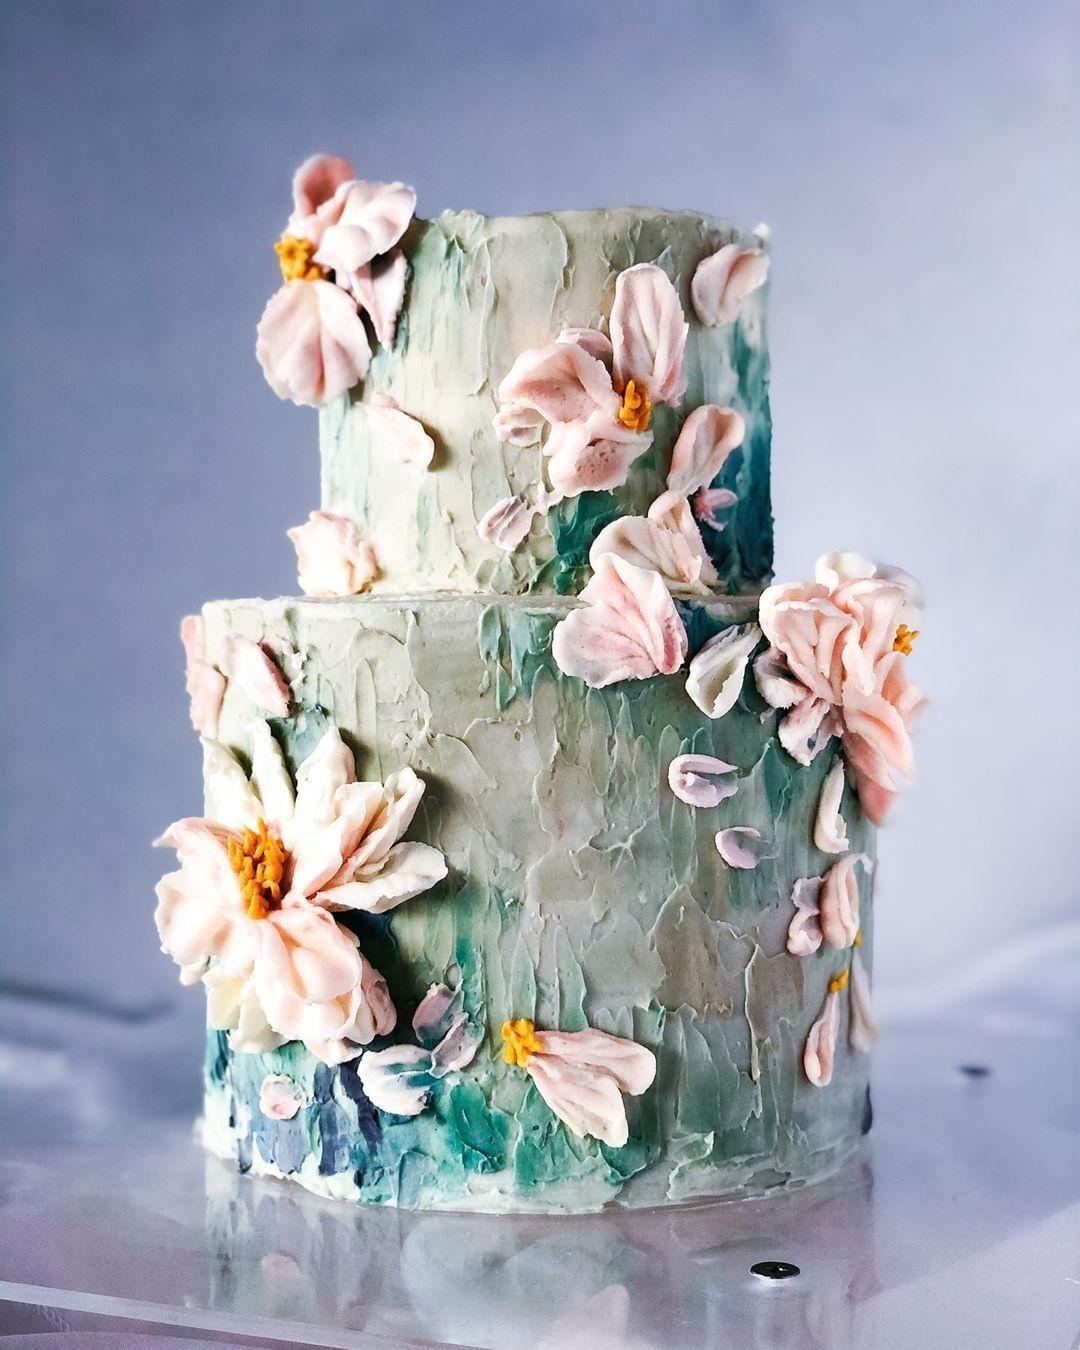 List of Latest Cake Designs That Look as Delish as They Taste